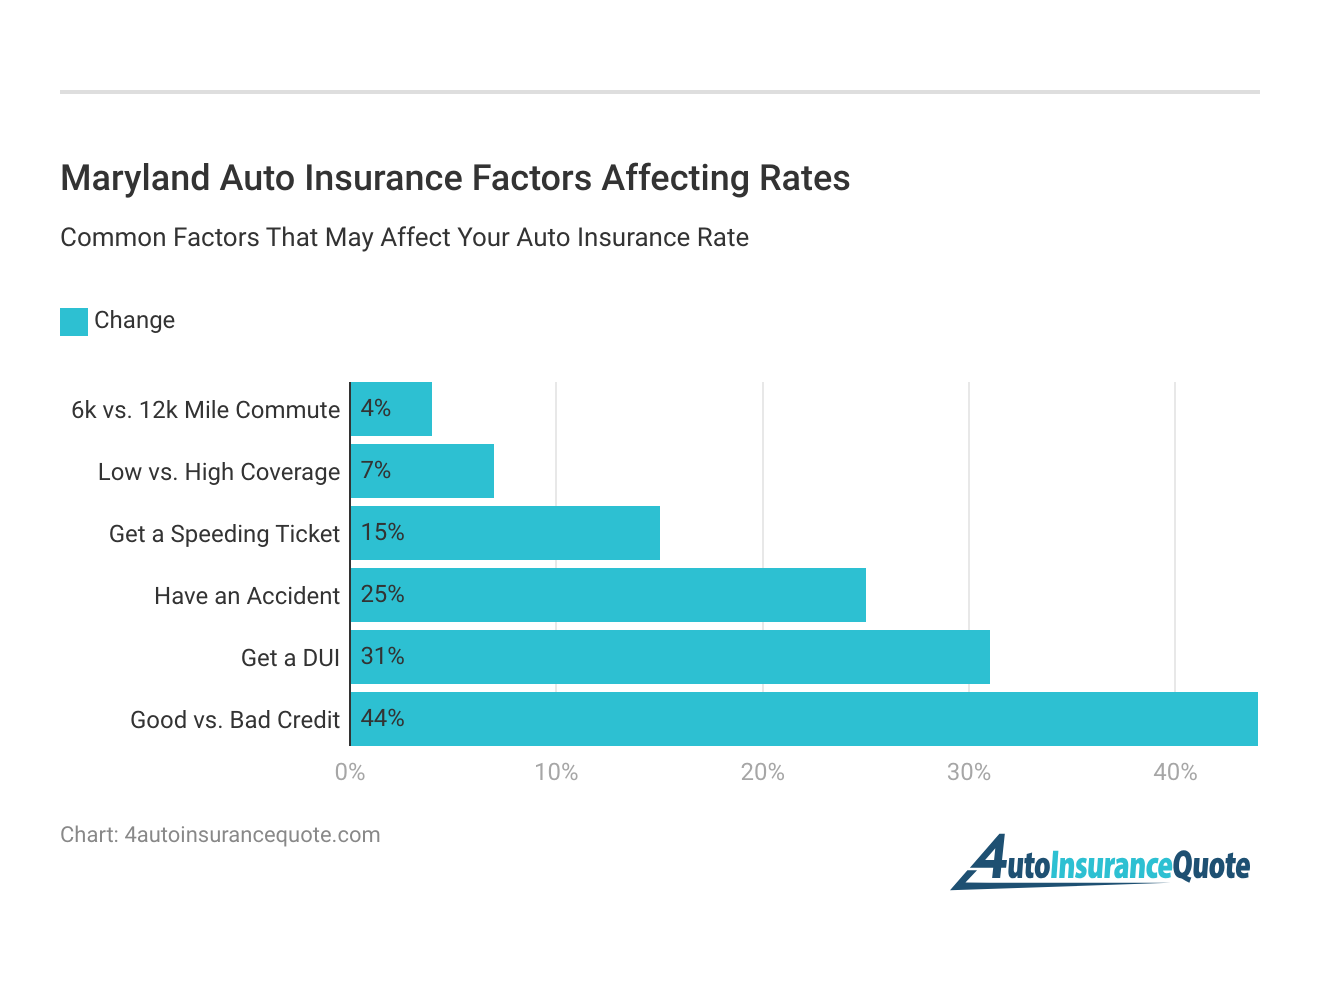 <h3>Maryland Auto Insurance Factors Affecting Rates</h3>